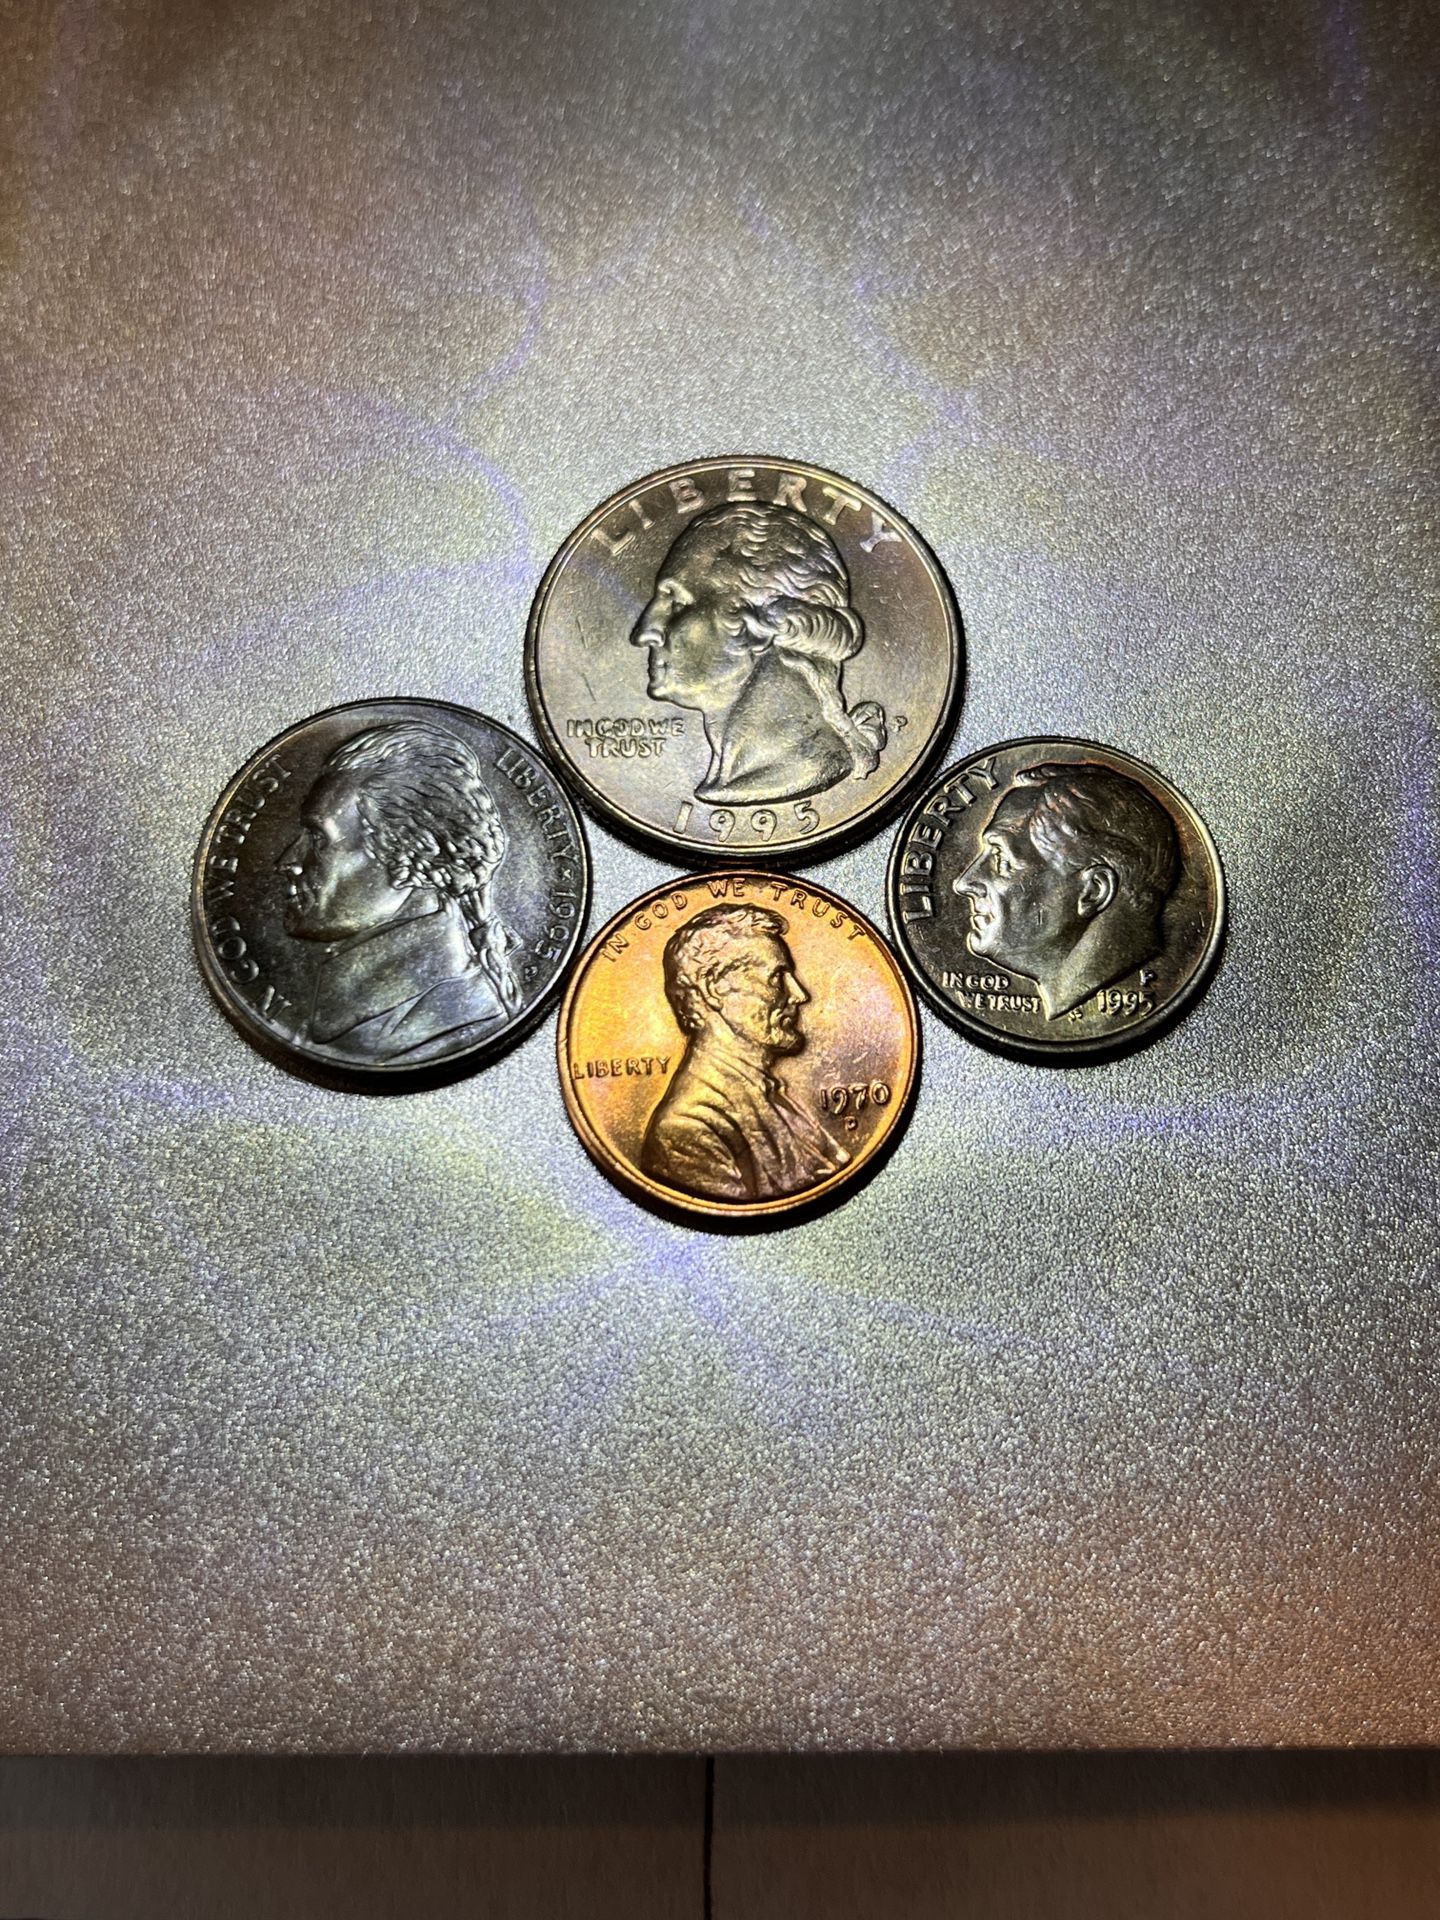 4 - US COINS MS UNCIRCULATED 1995, Quarter-Dime-Nickel & a 1970d Penny! 